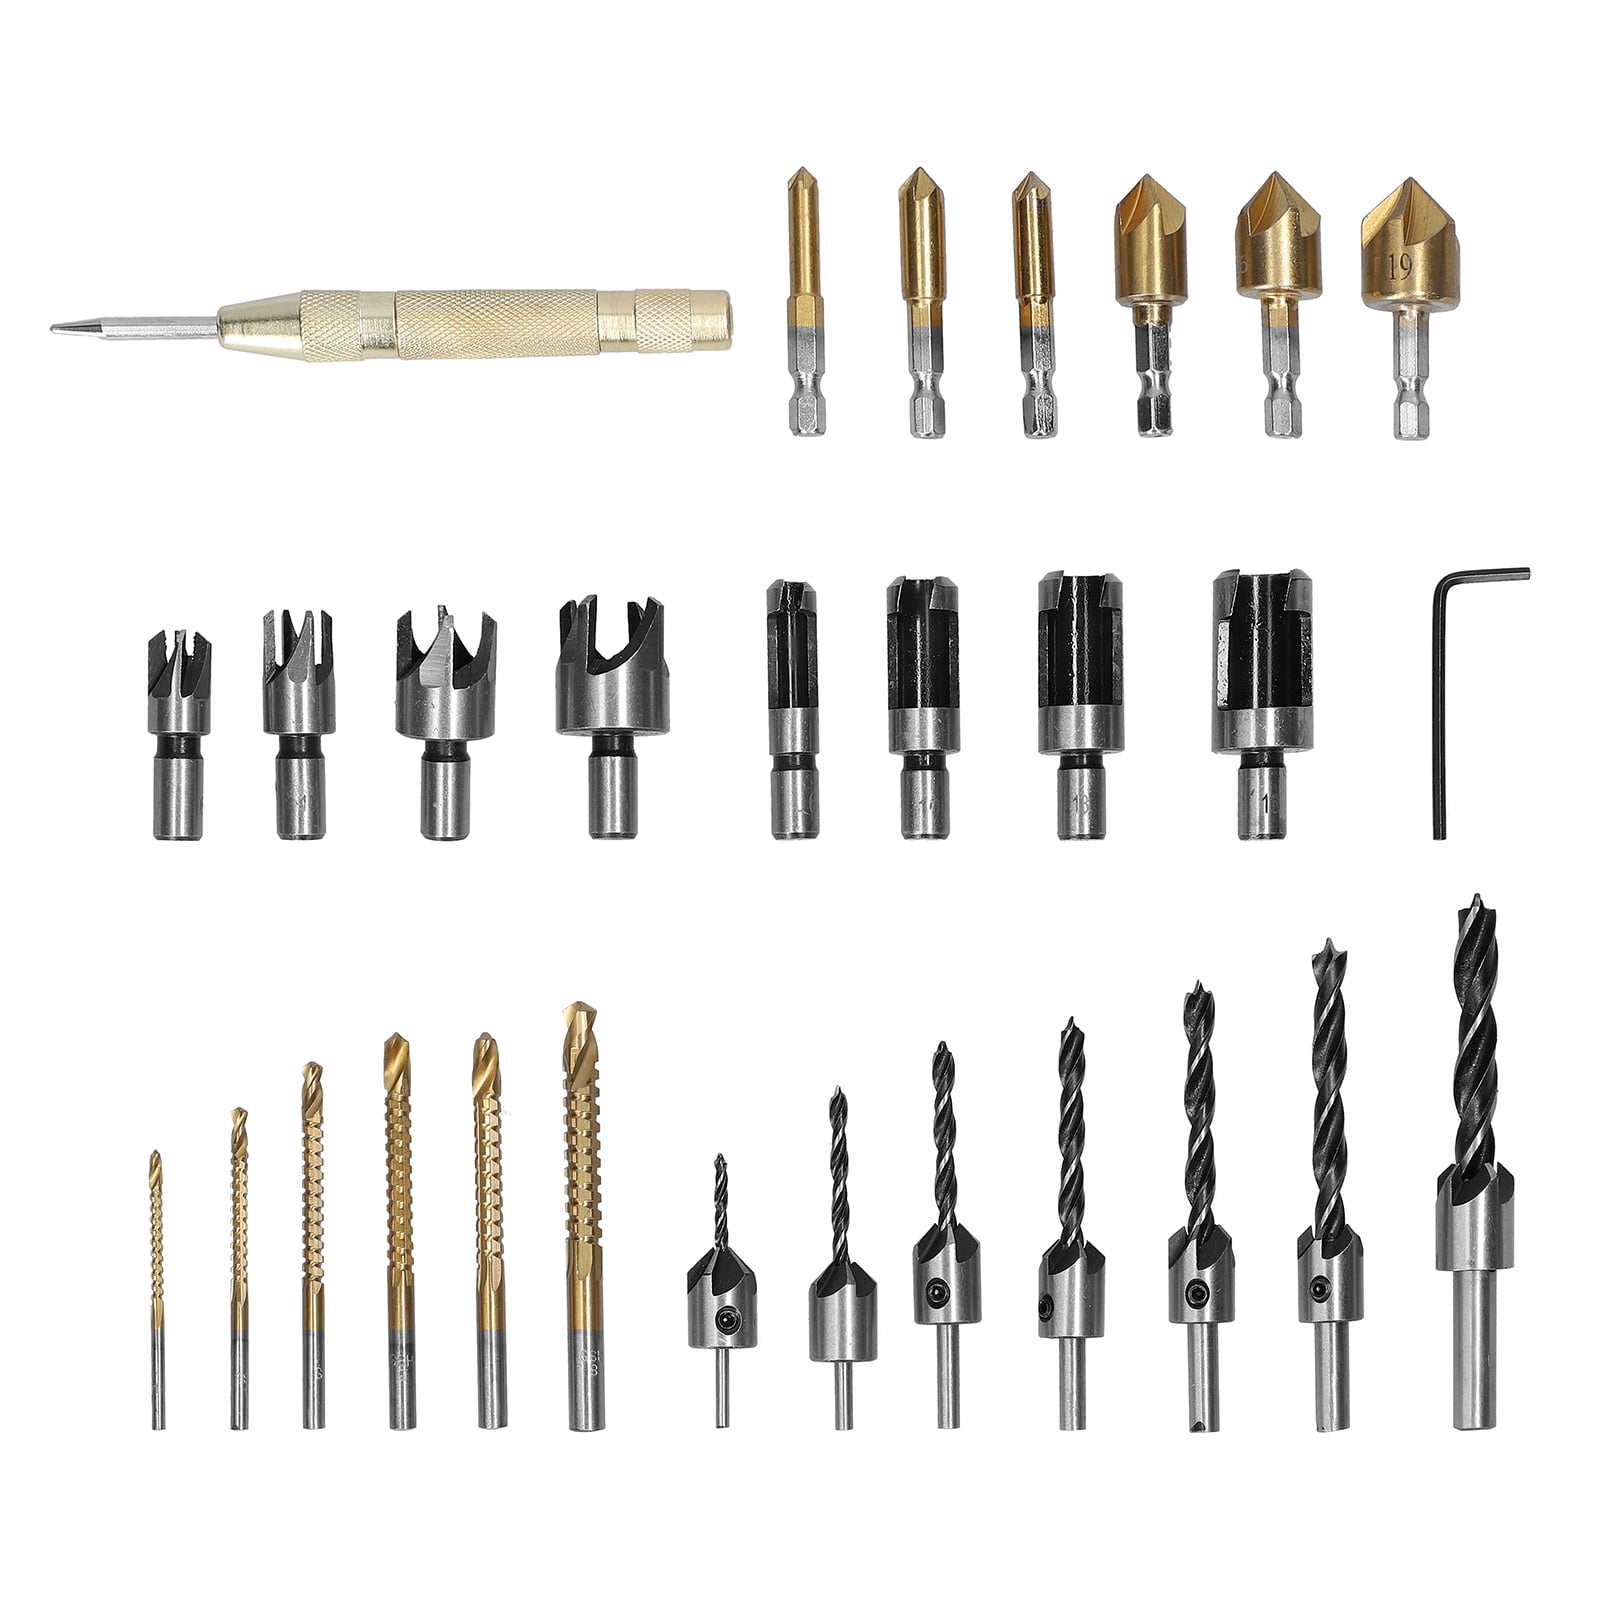 Alloy Steel Chamfer End Mills Set Home and General Construction for DIY Chamfer Cutter 7-in-1 Chamfer Drill Bit and Center Punch Woodworking Tool Set